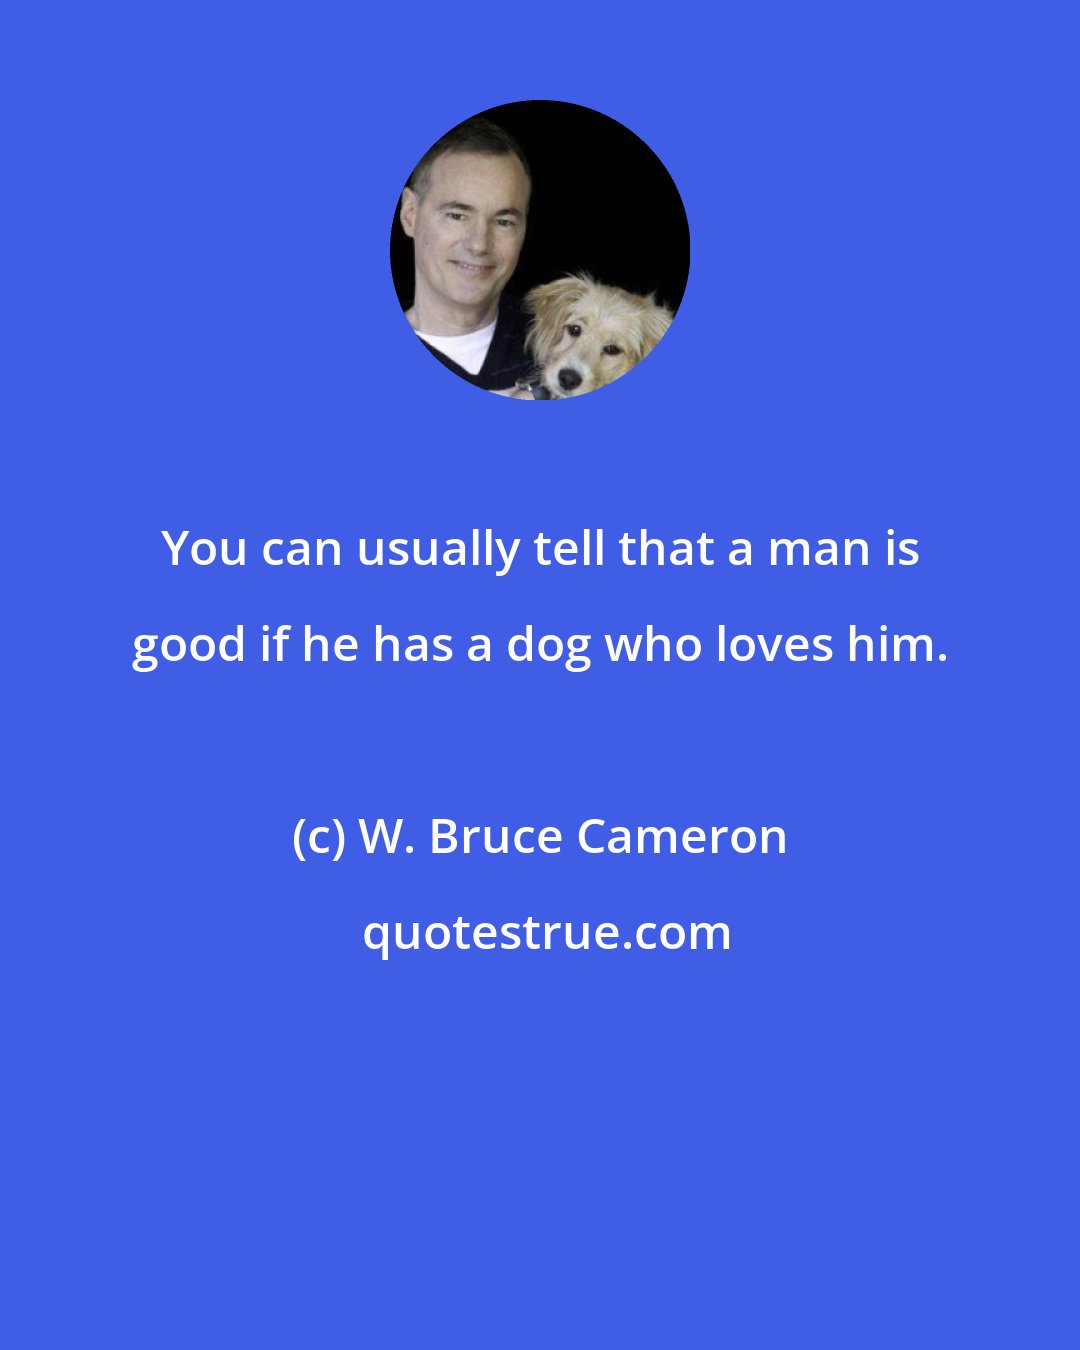 W. Bruce Cameron: You can usually tell that a man is good if he has a dog who loves him.